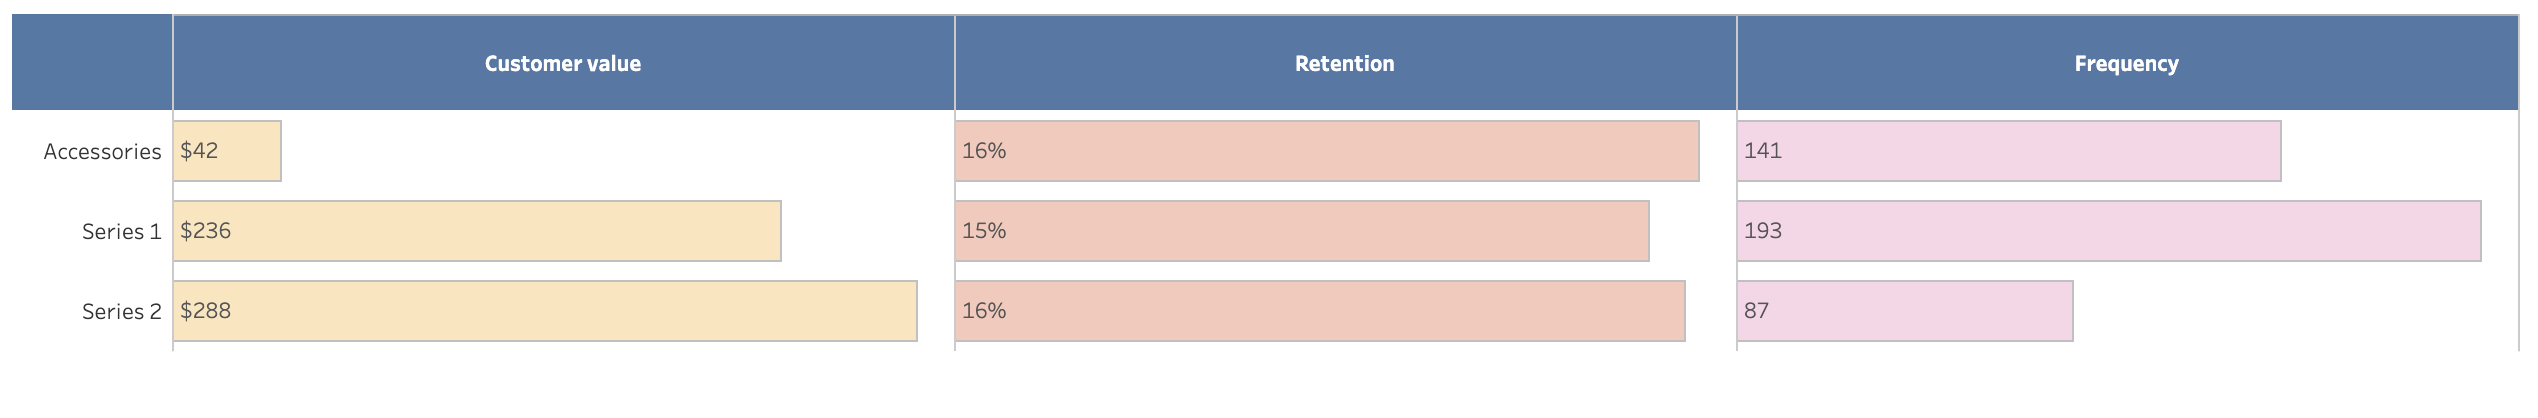 Retention by product